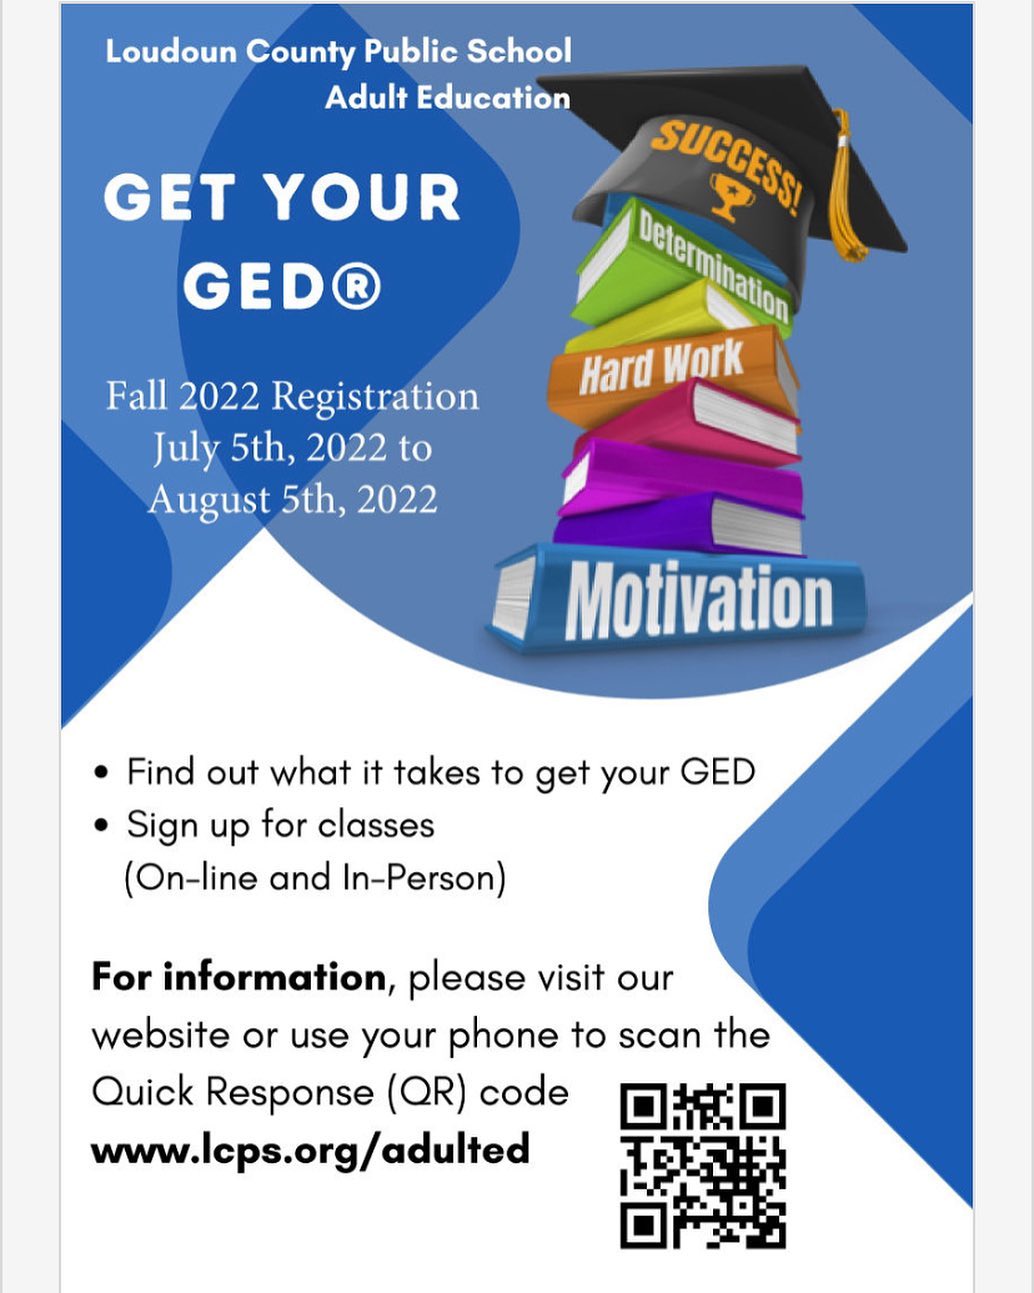 If you are interested in getting a GED here’s some info